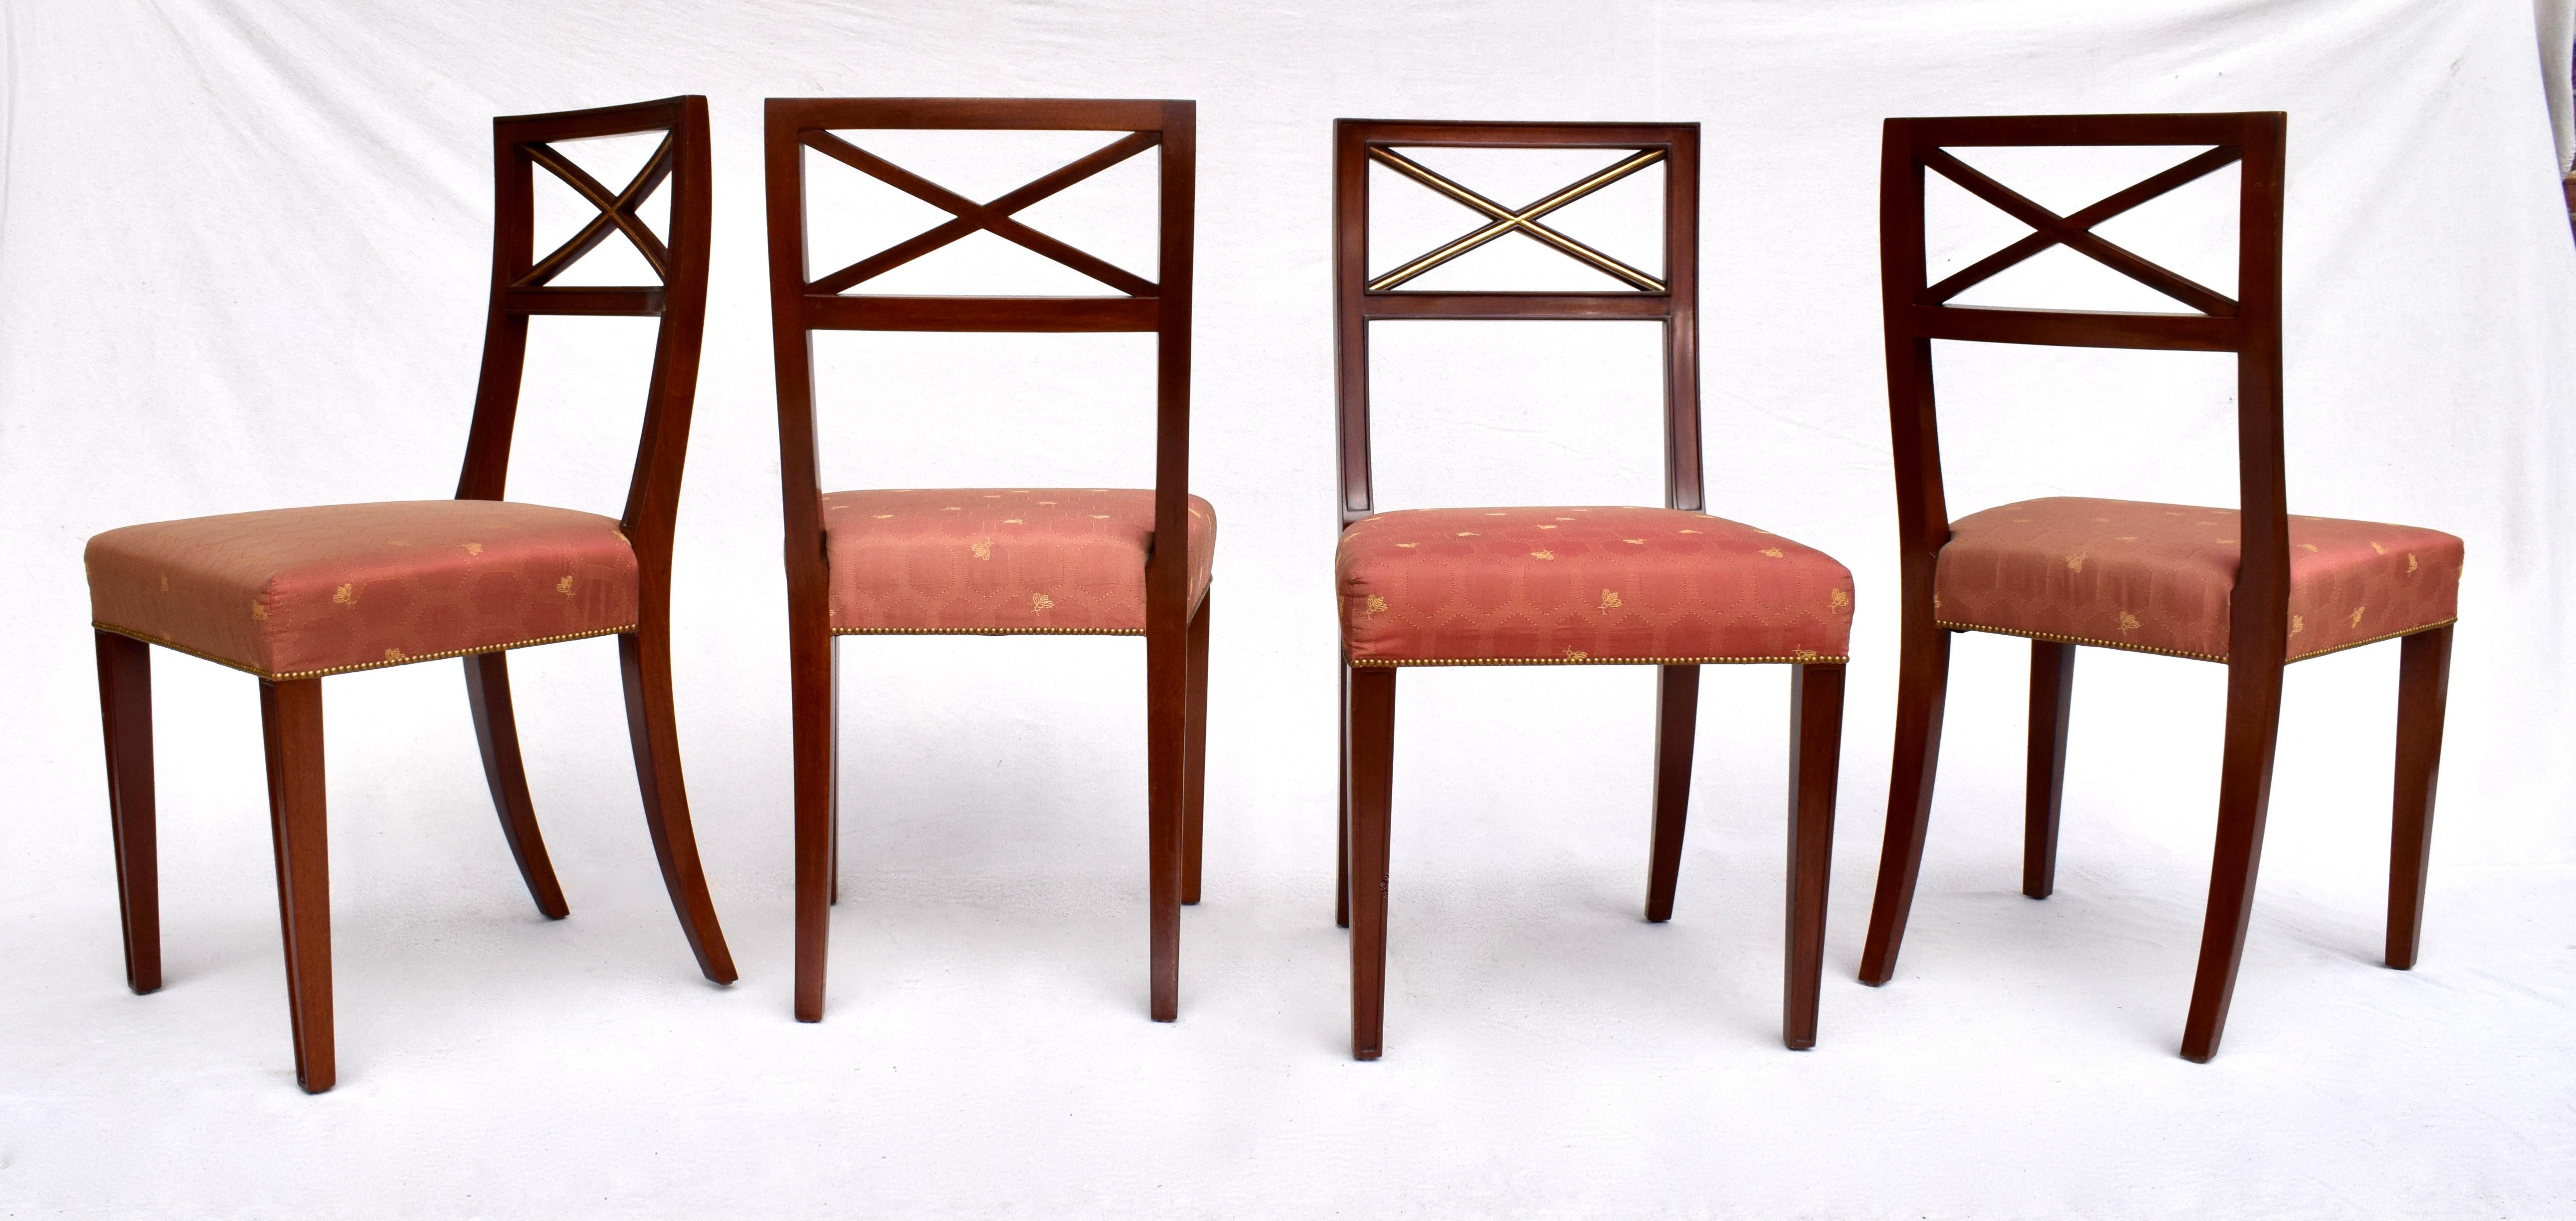 A striking set of six solid Mahogany parcel gilt X back dining chairs with distinct design elements as seen in the works of Thomas Pheasant for Baker & Tommi Parzinger. Includes Two cleverly designed re-curved arm chairs for comfortable dining and 4